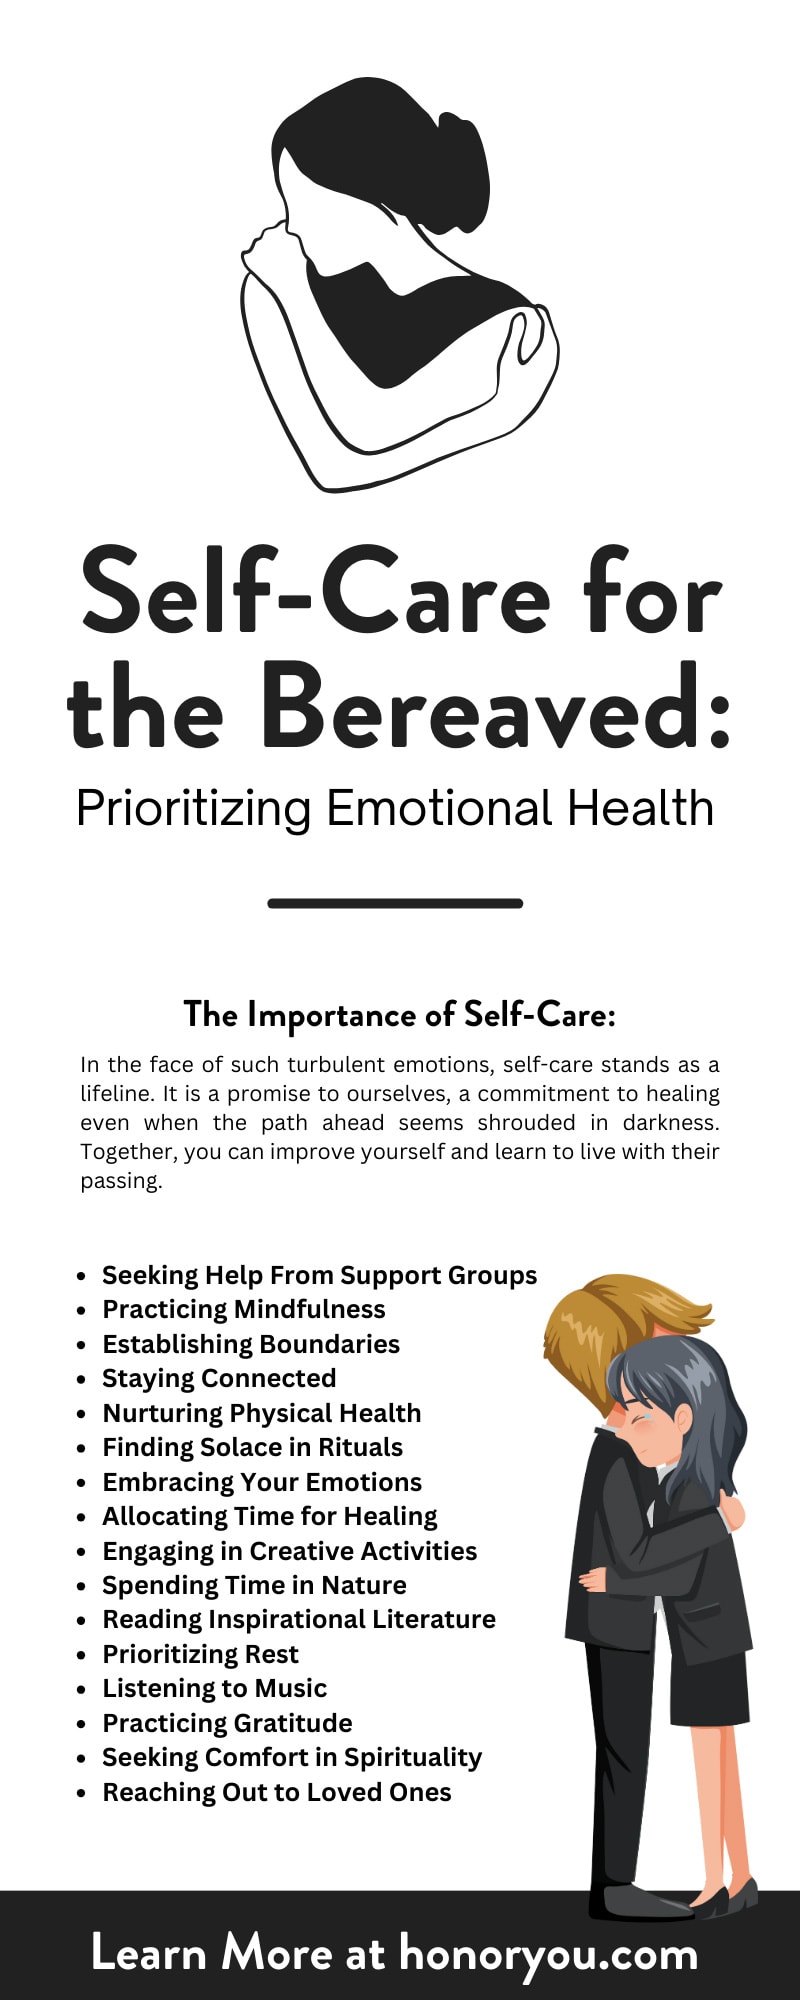 Self-Care for the Bereaved: Prioritizing Emotional Health